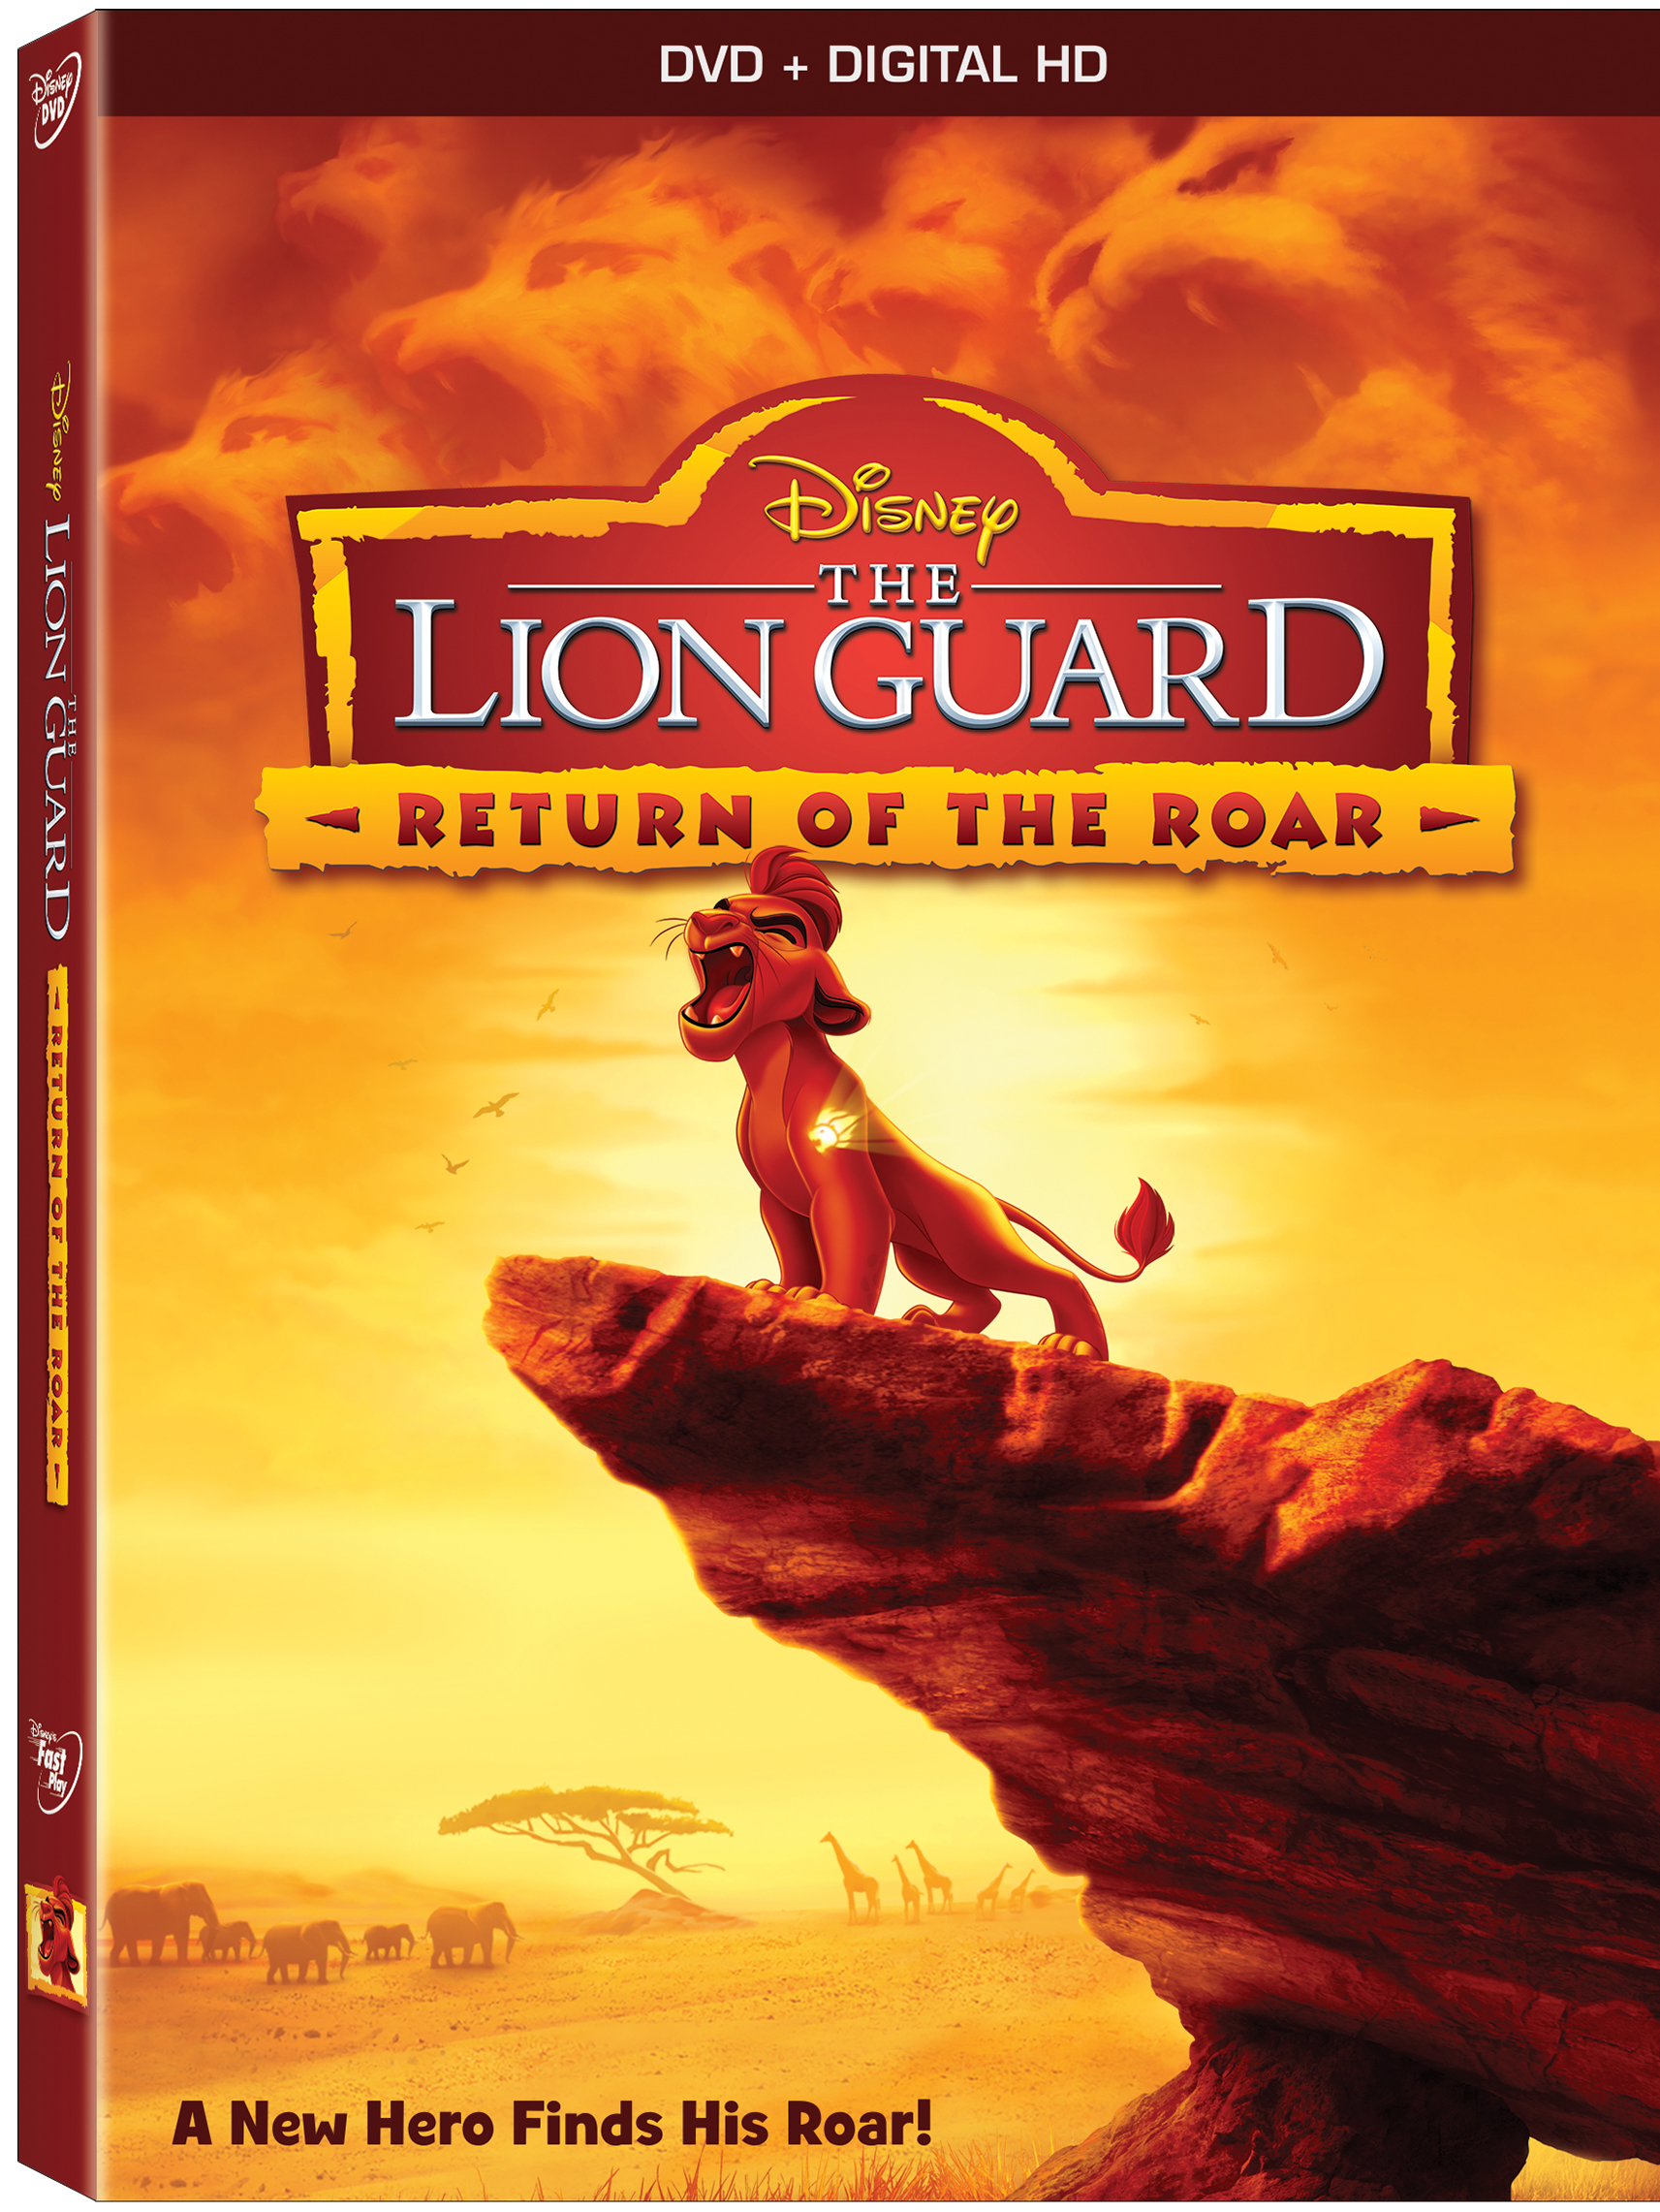 Disney’s ‘The Lion Guard: Return Of The Roar’ Heads to DVD 2/23